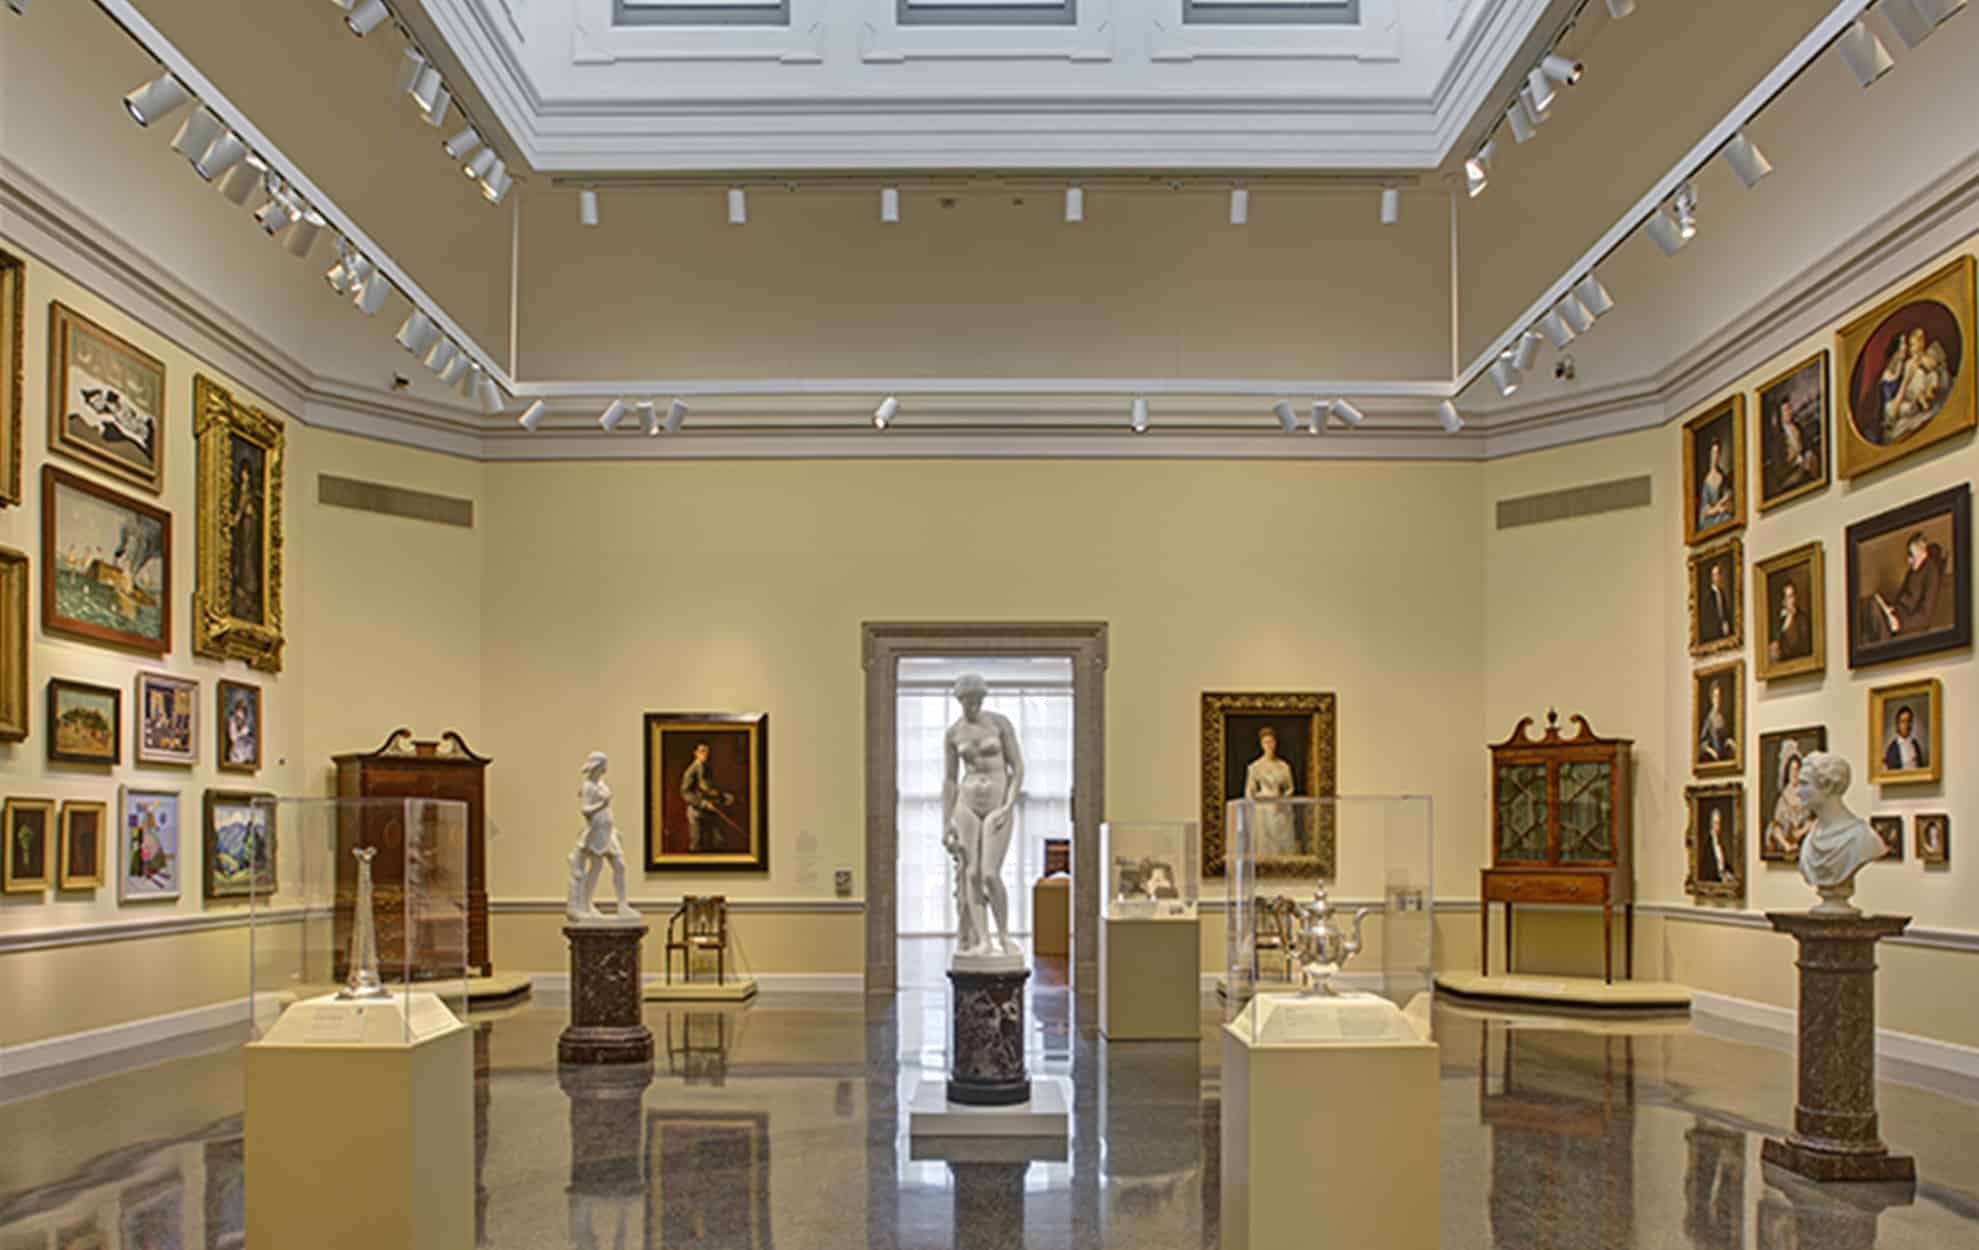 Baltimore Museum of The Art near The Ivy Hotel. Sculptures and paintings are displayed in this room.